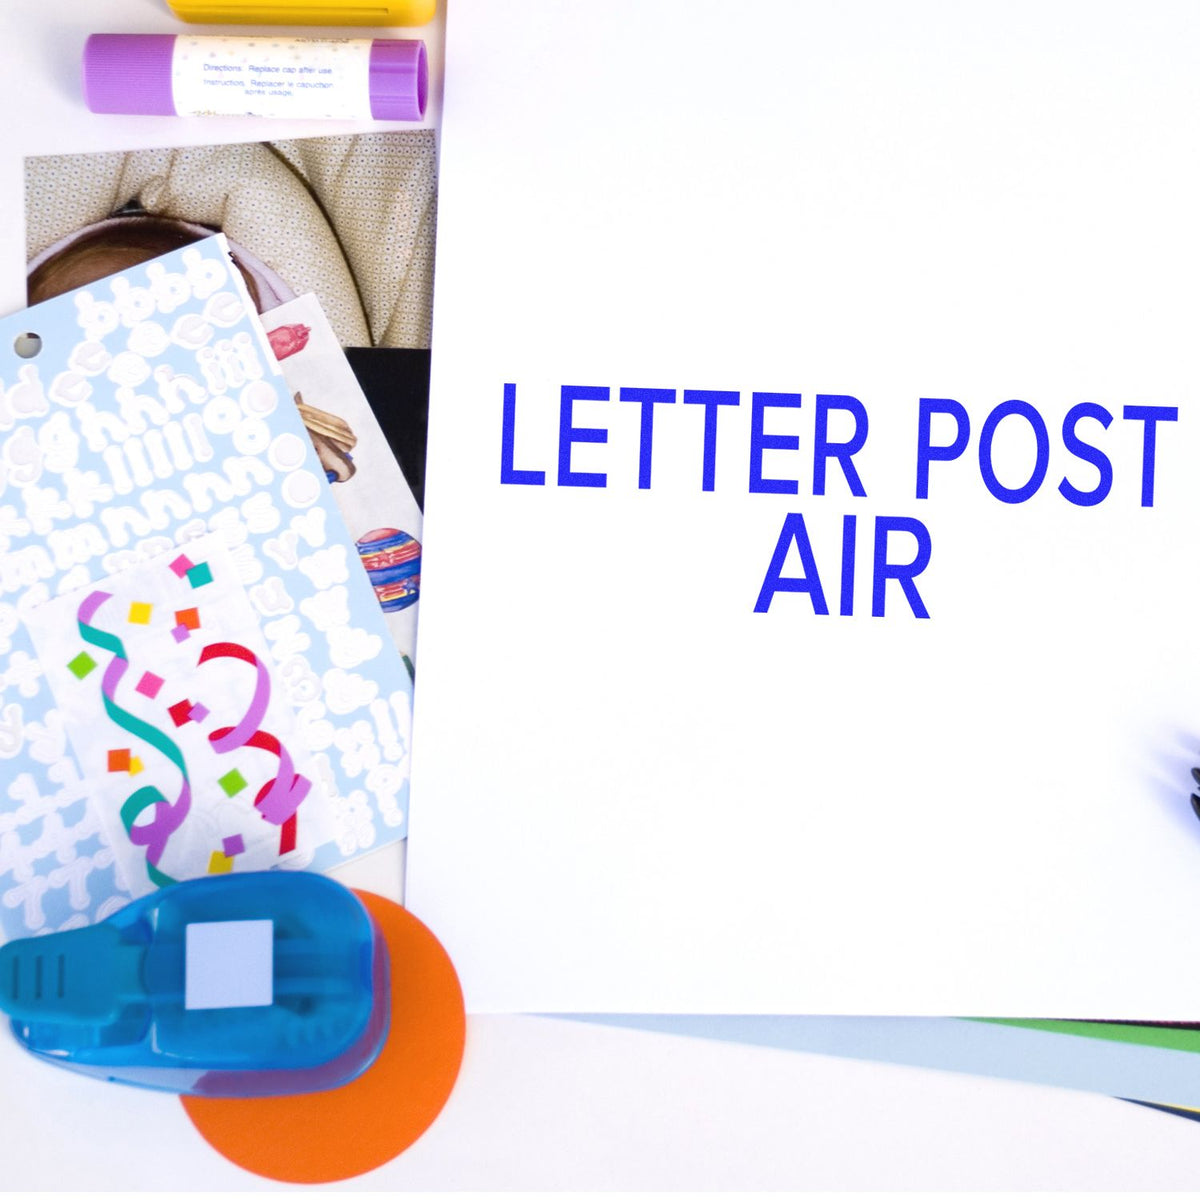 Slim Pre-Inked Letter Post Air Stamp In Use Photo